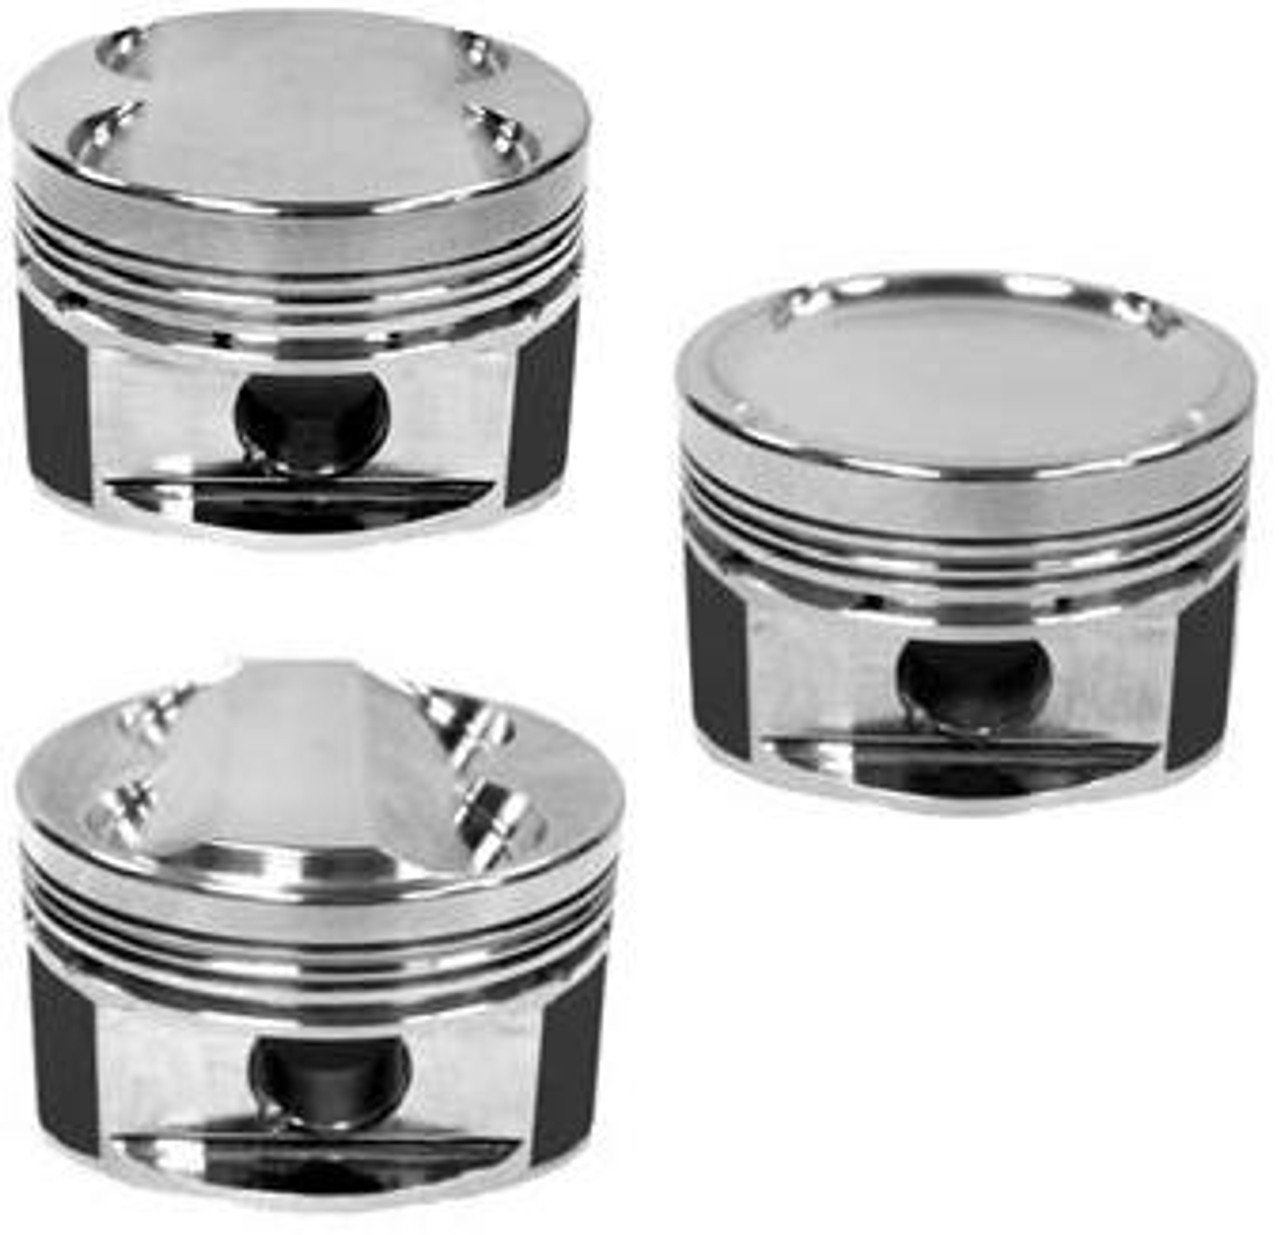 Manley Dish Piston Set with Rings